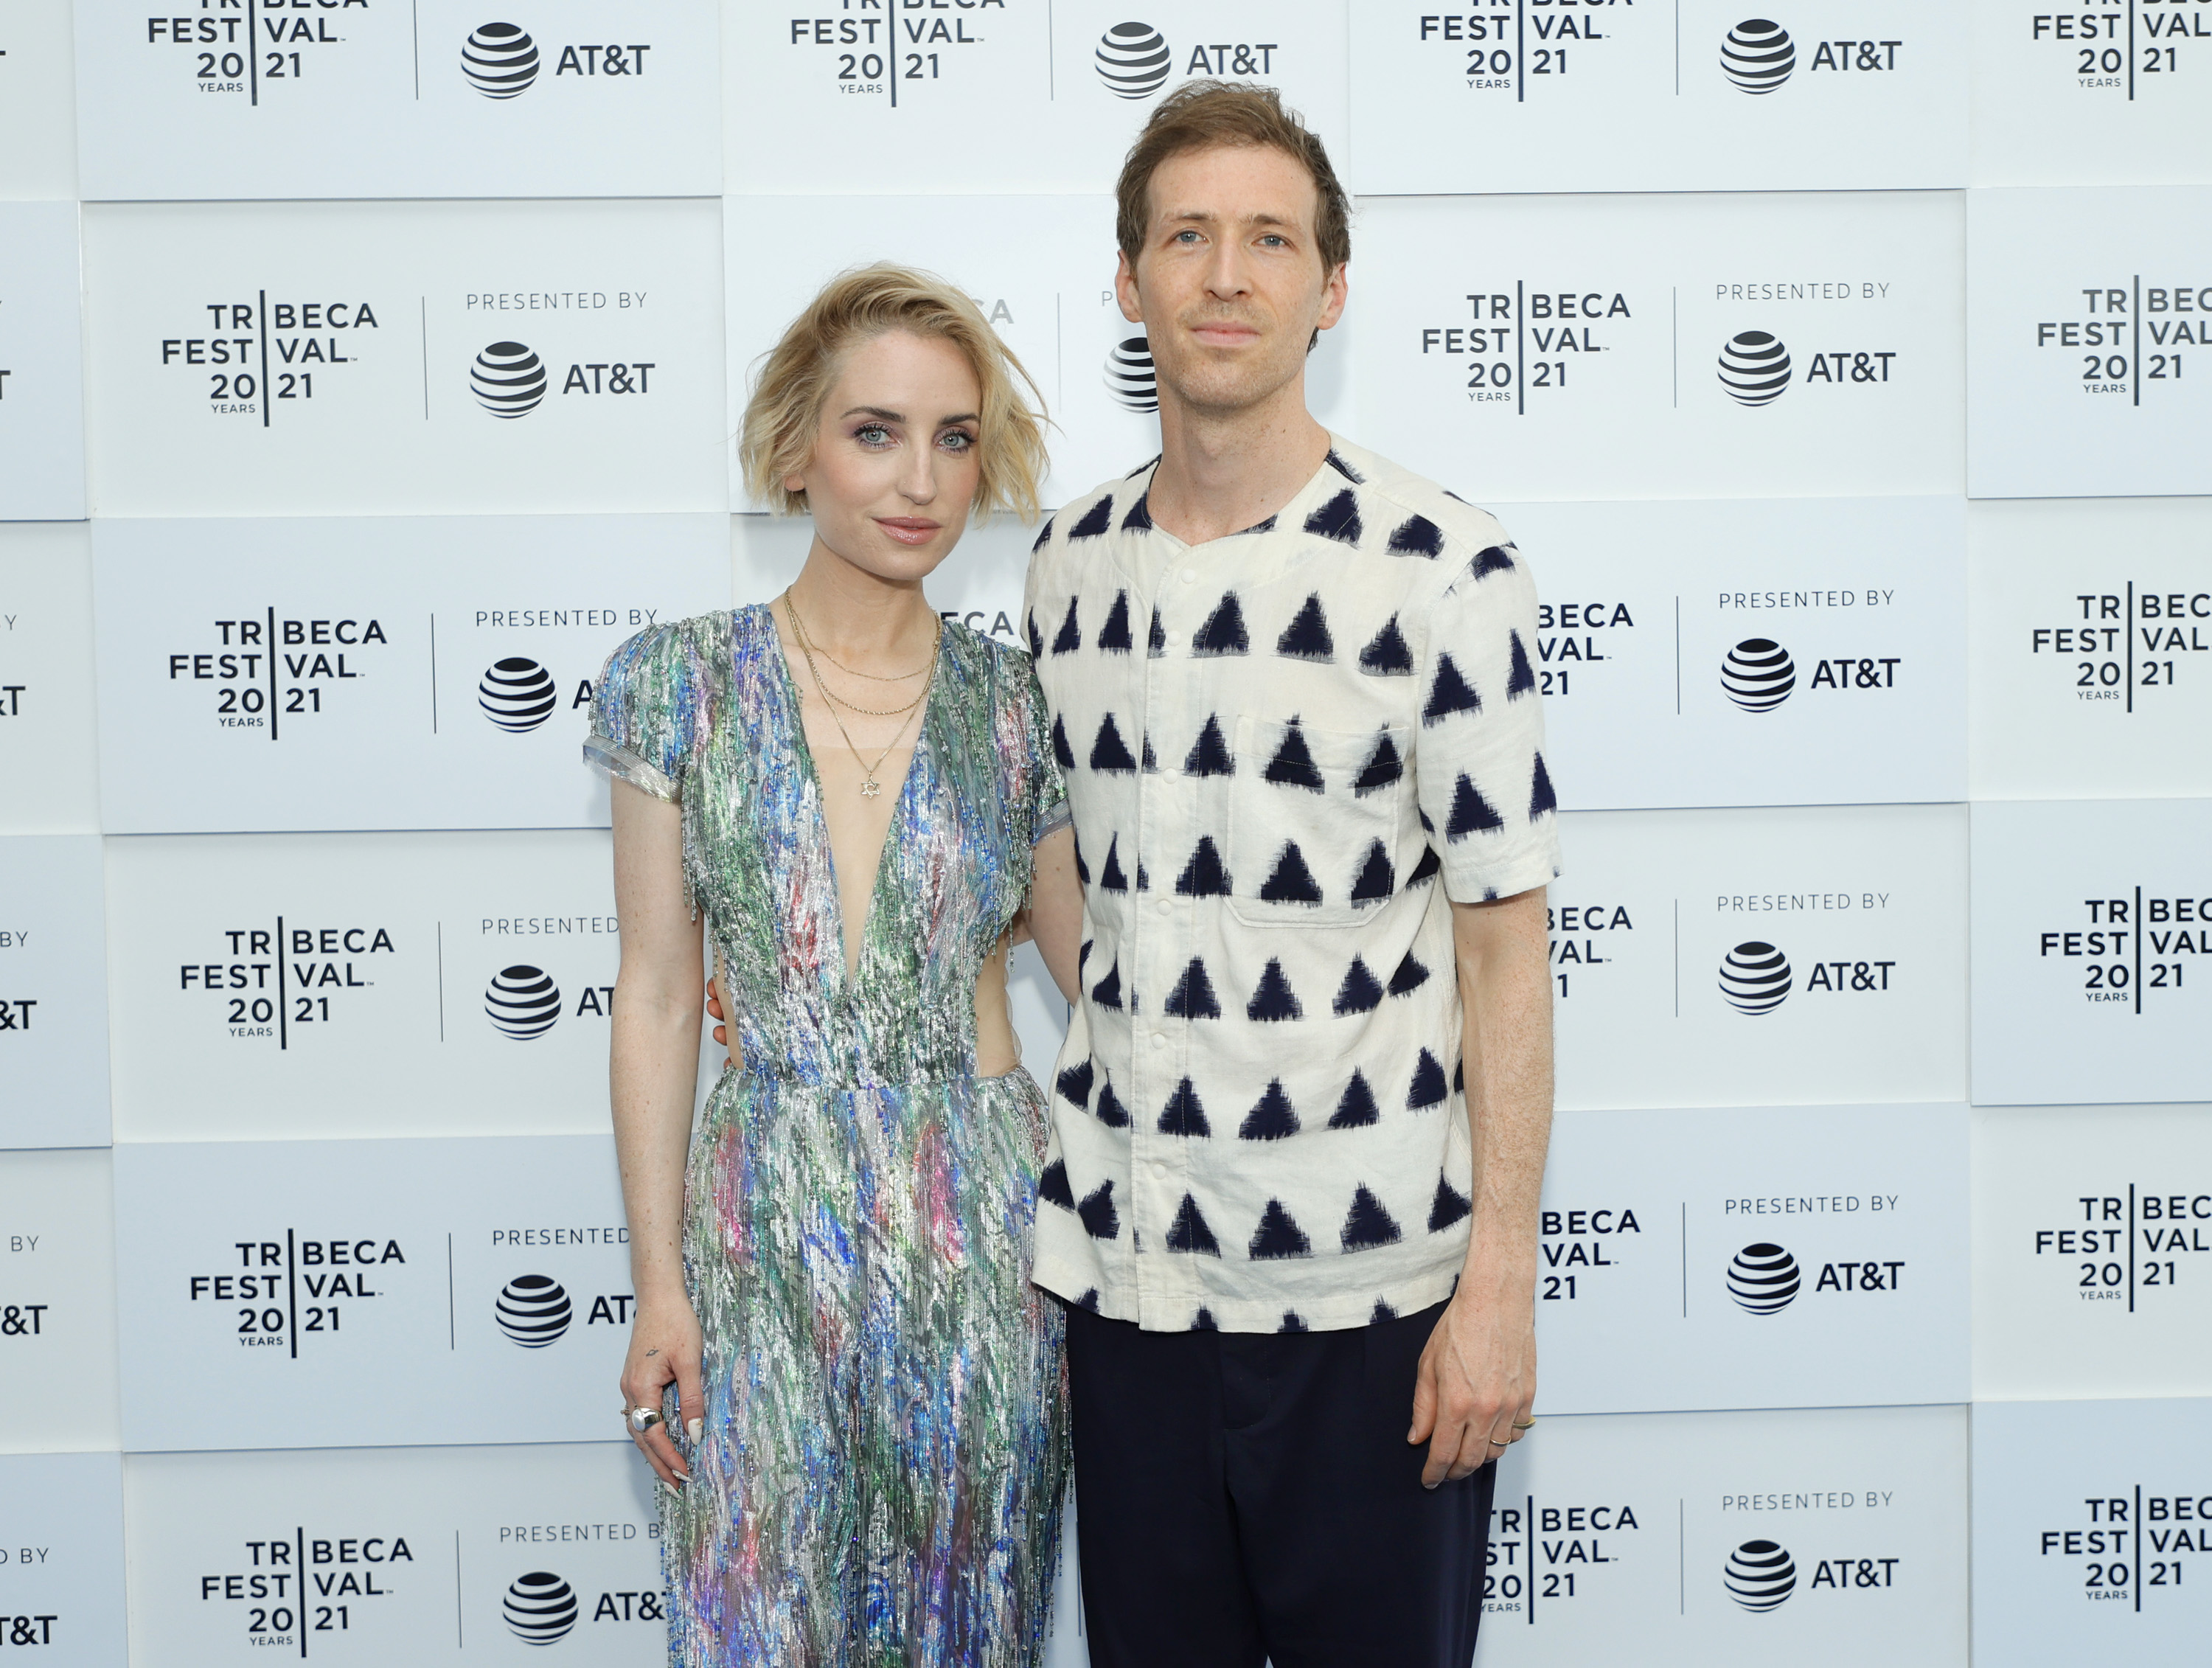 Zoe Lister-Jones and Daryl Wein at the "How It Ends" premiere during the 2021 Tribeca Festival on June 20, 2021, in New York City | Source: Getty Images